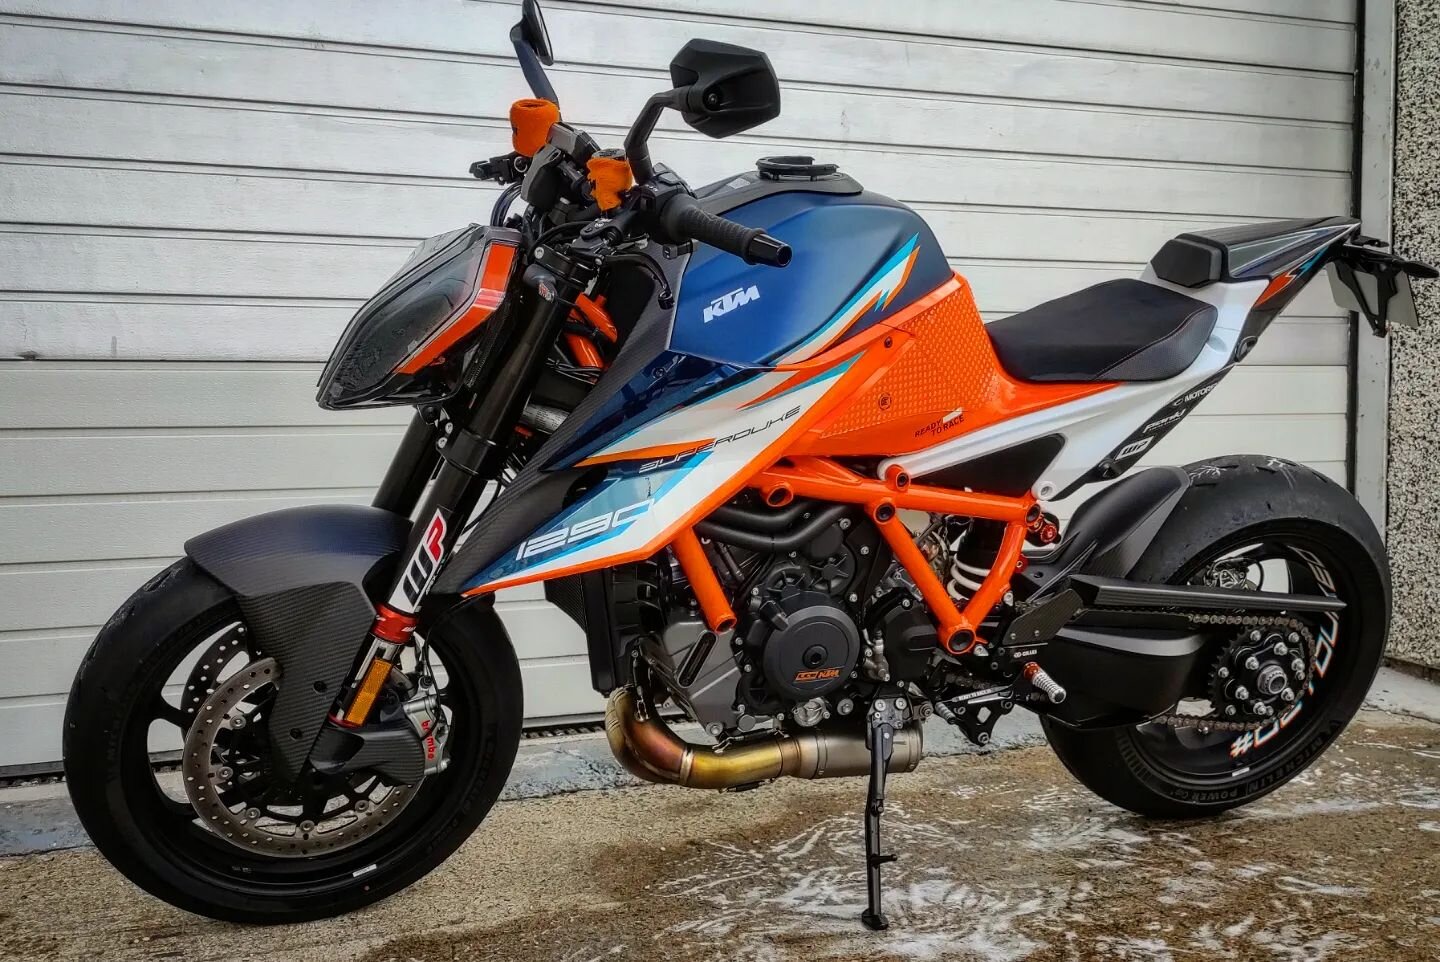 Just before the rain hit, we got it back in the garage to get it finish.
Love the look of these ktm 1290 Superduke 
.
.
.
.
#ktm1290superduker #ktm #superduke #ktmsuperduke1290 #superduke1290 #ktmsuperduke1290r #superduke1290r #readytorace #getduked 